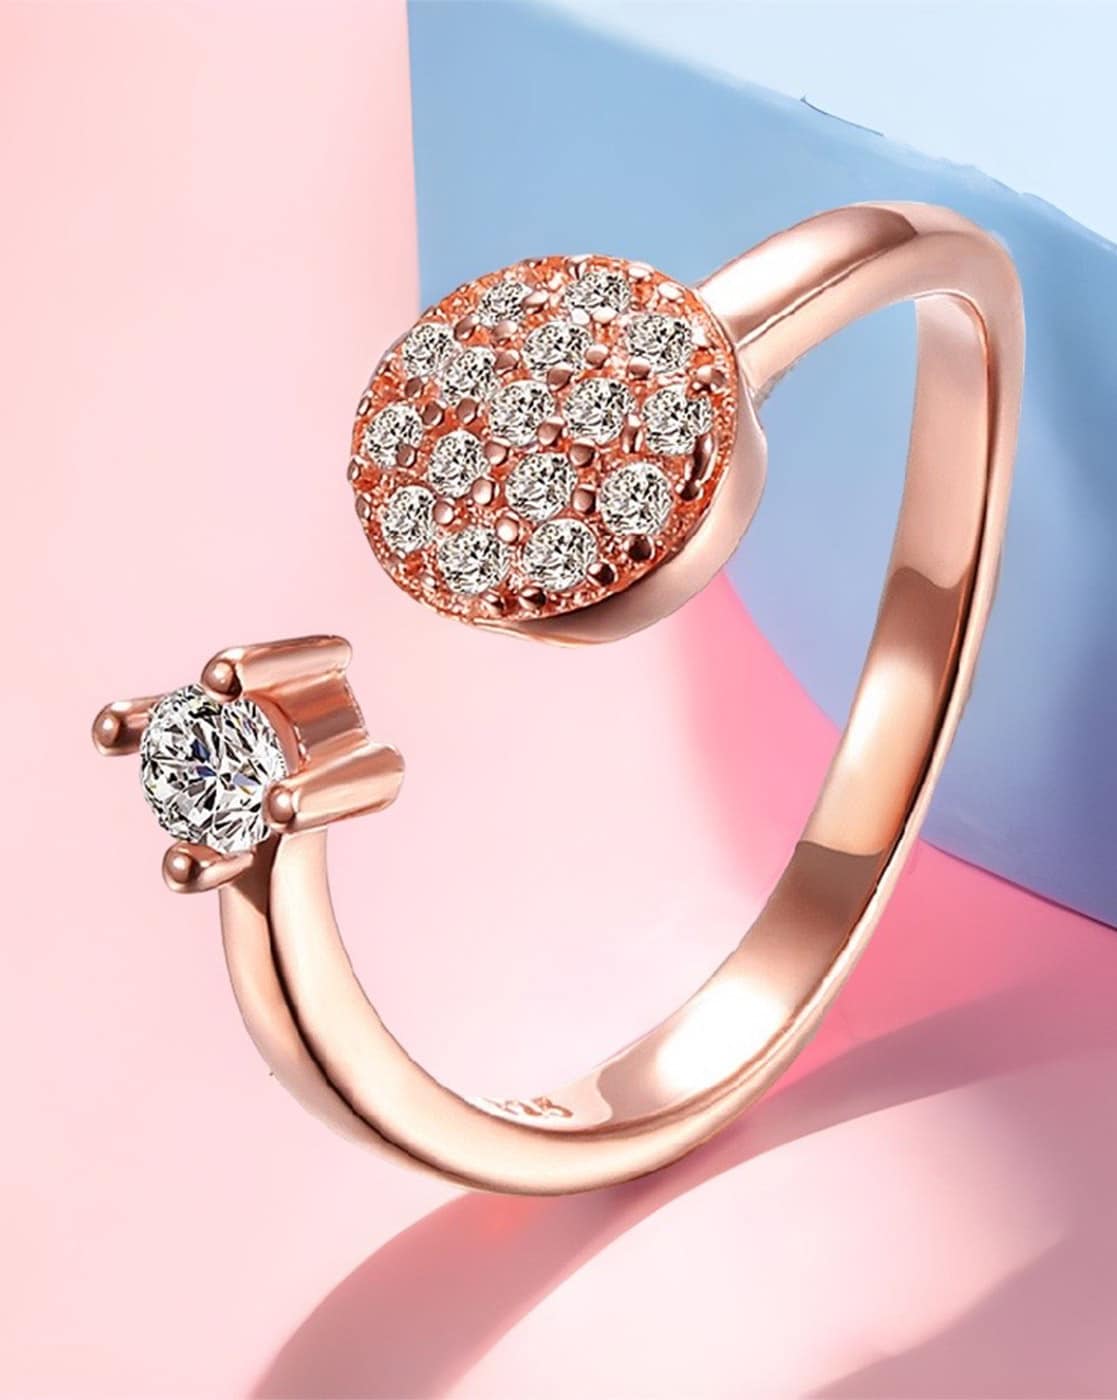 Is Rose Gold Real Gold? Unveiling the Truth Behind the Trend